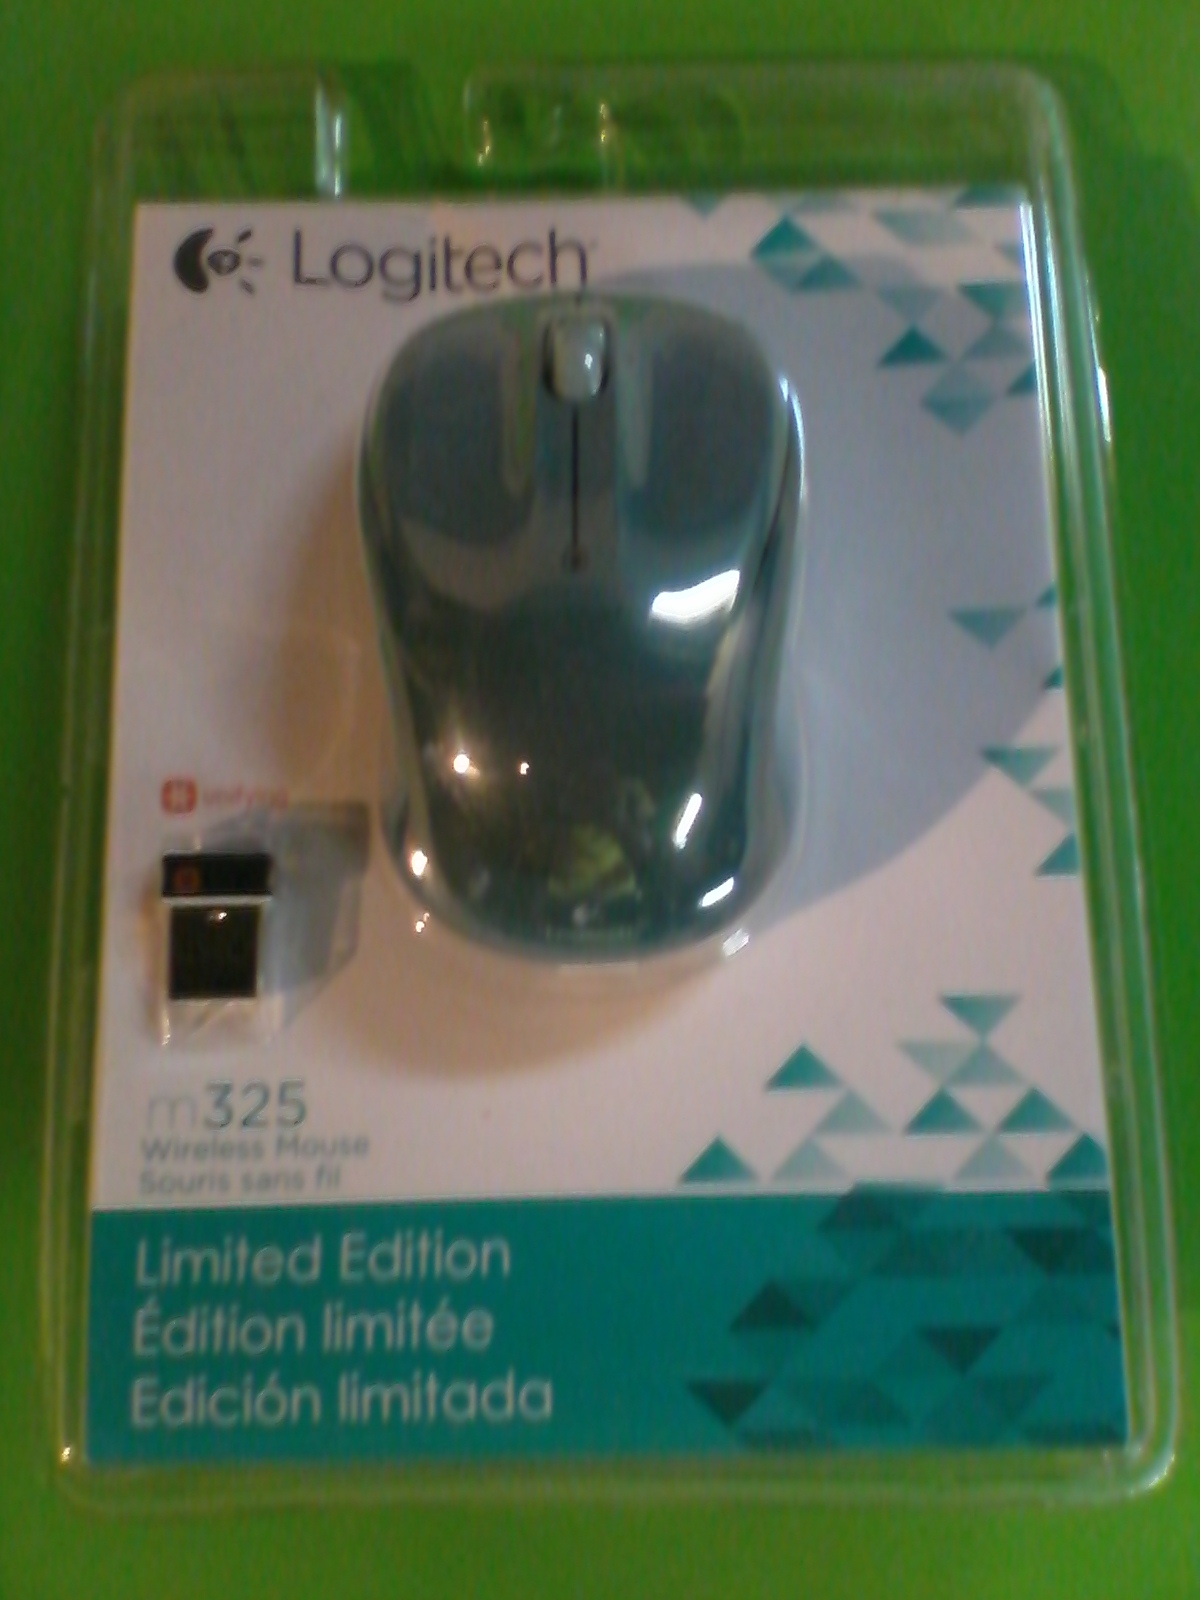 Forbyde Erfaren person Evakuering Reviewing Logitech's M325 Wireless Mouse | Linux.org